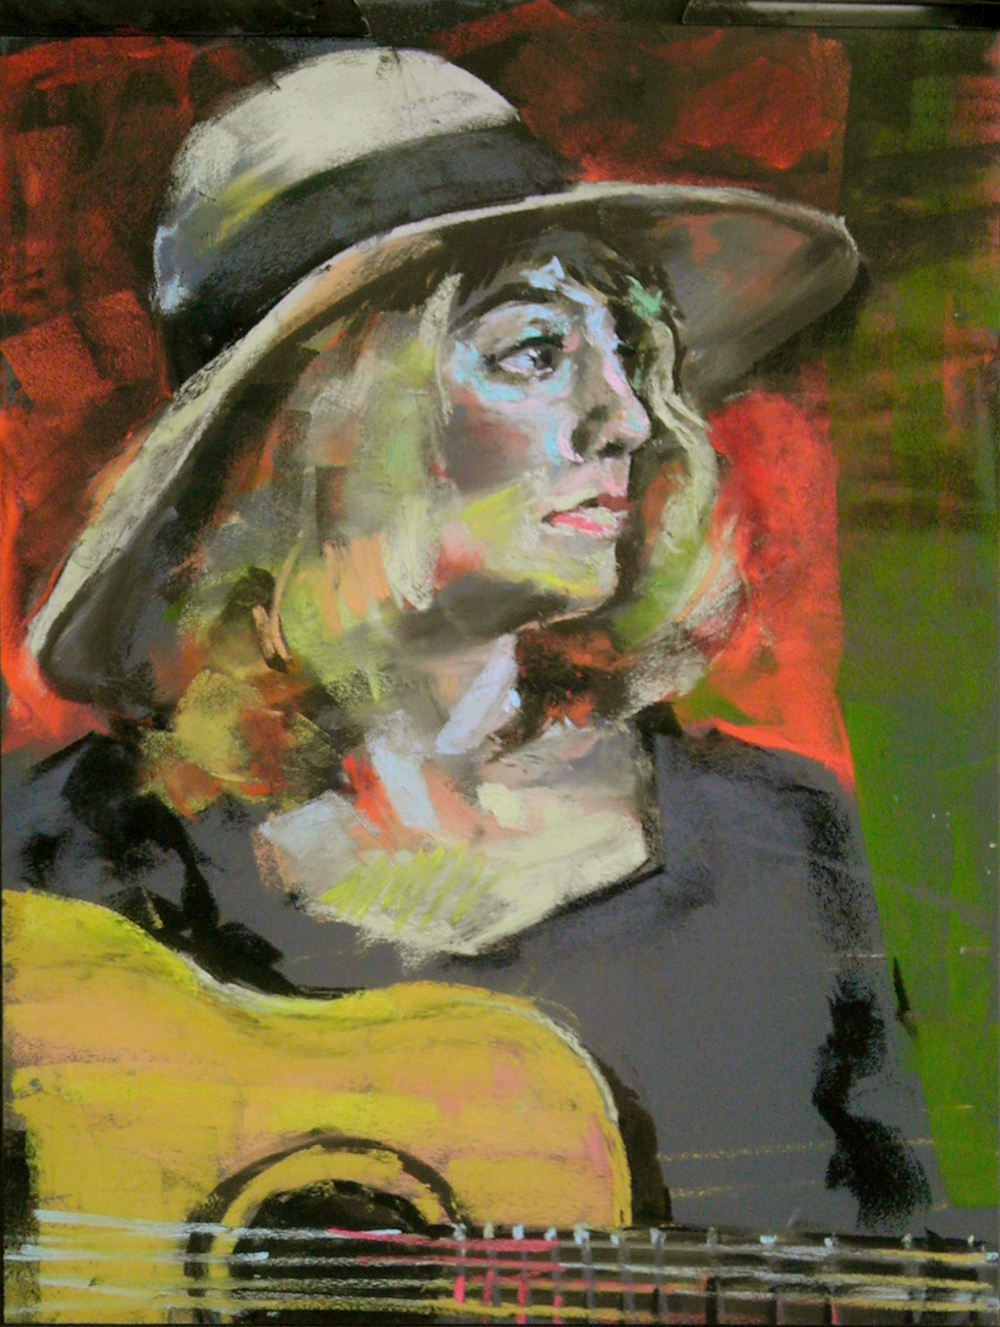 A Portrait of a Guitarist Done in Soft Pastels